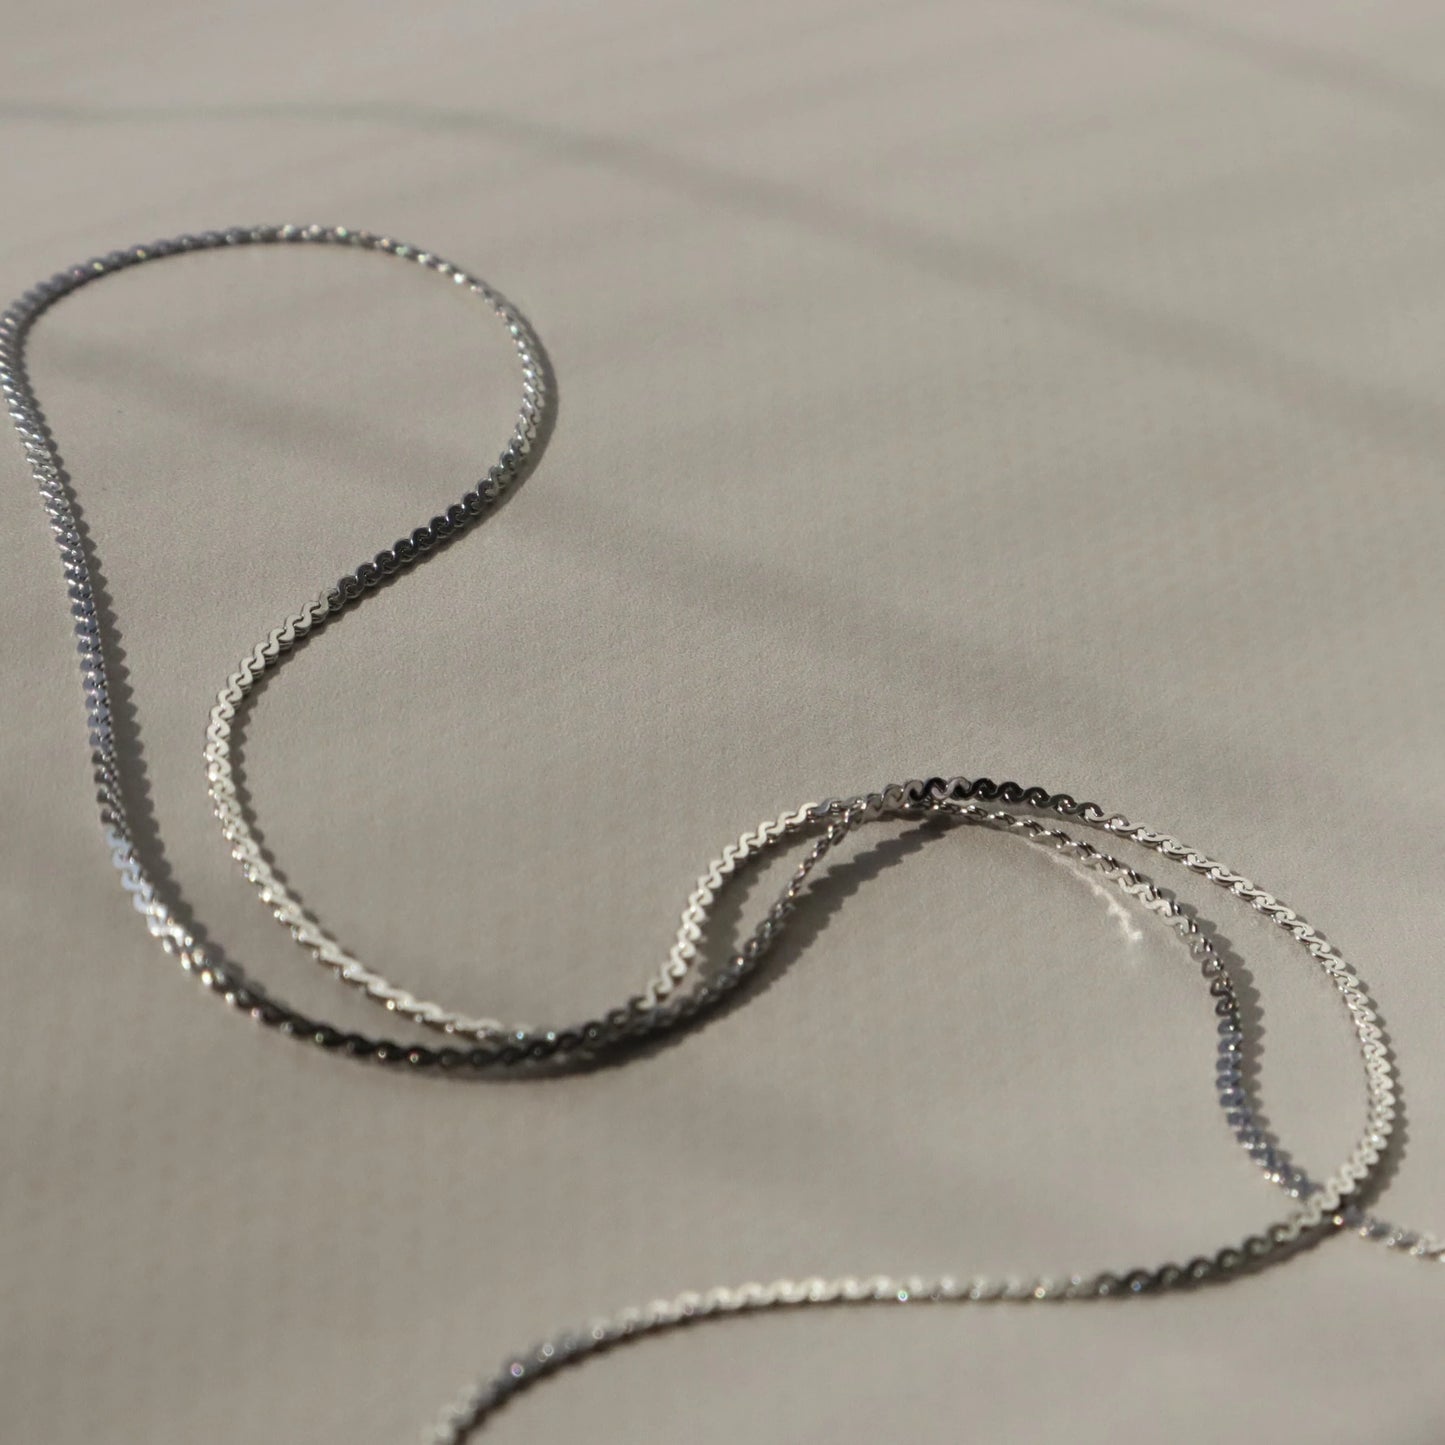 N163 stainless slim necklace